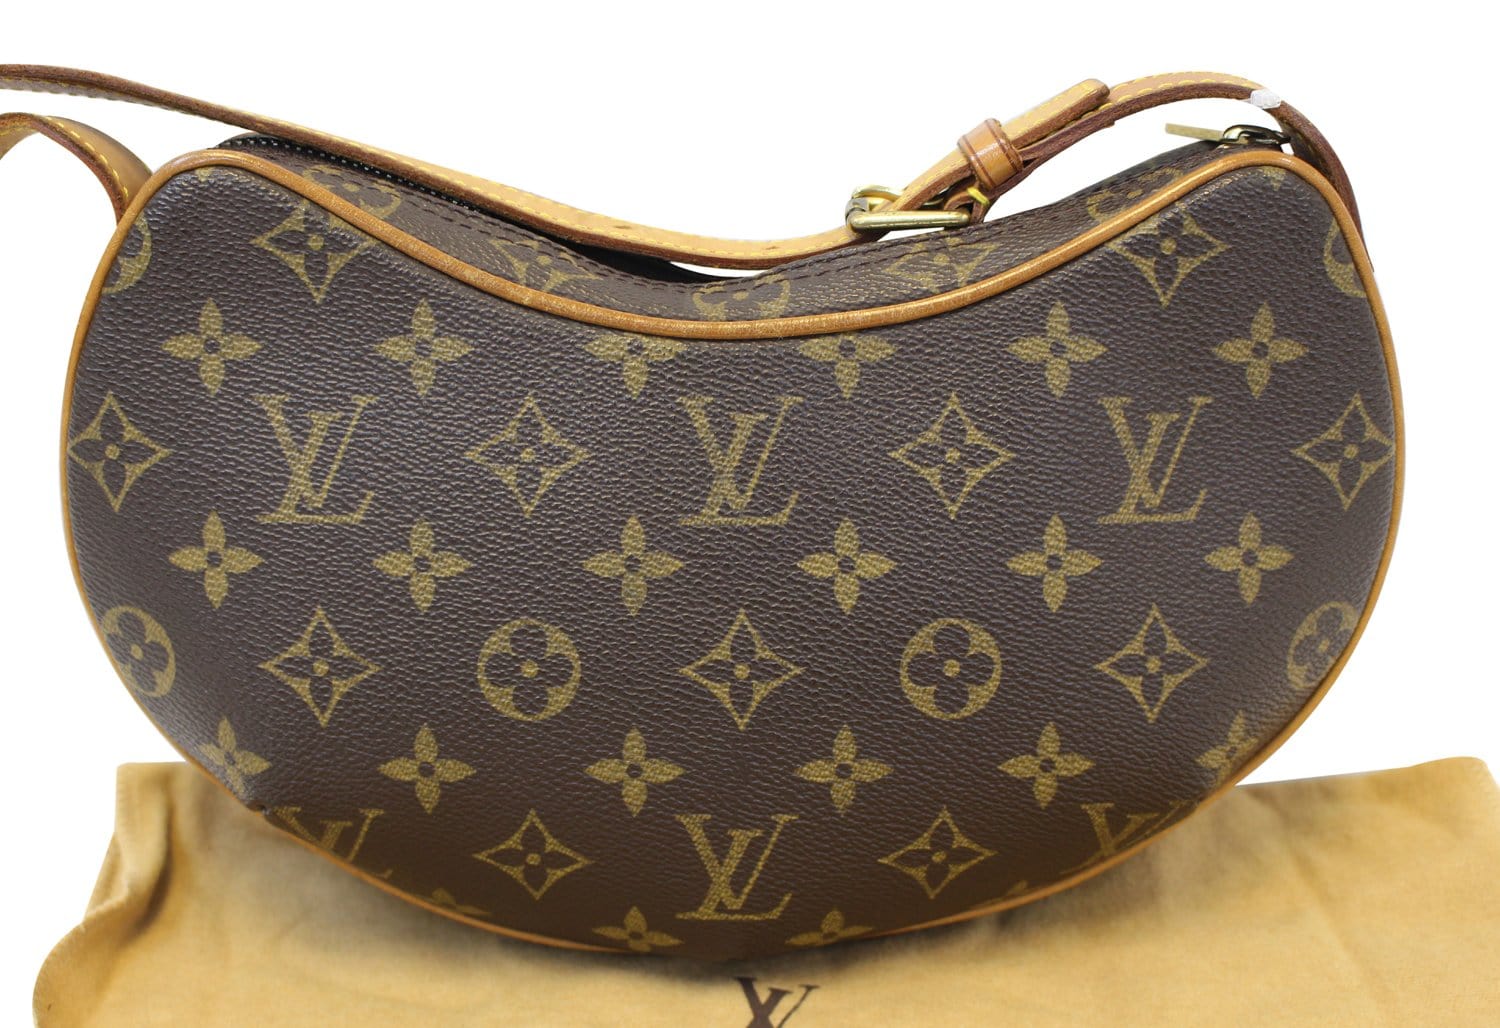 For Fall try this Louis Vuitton Croissant PM a classic vintage